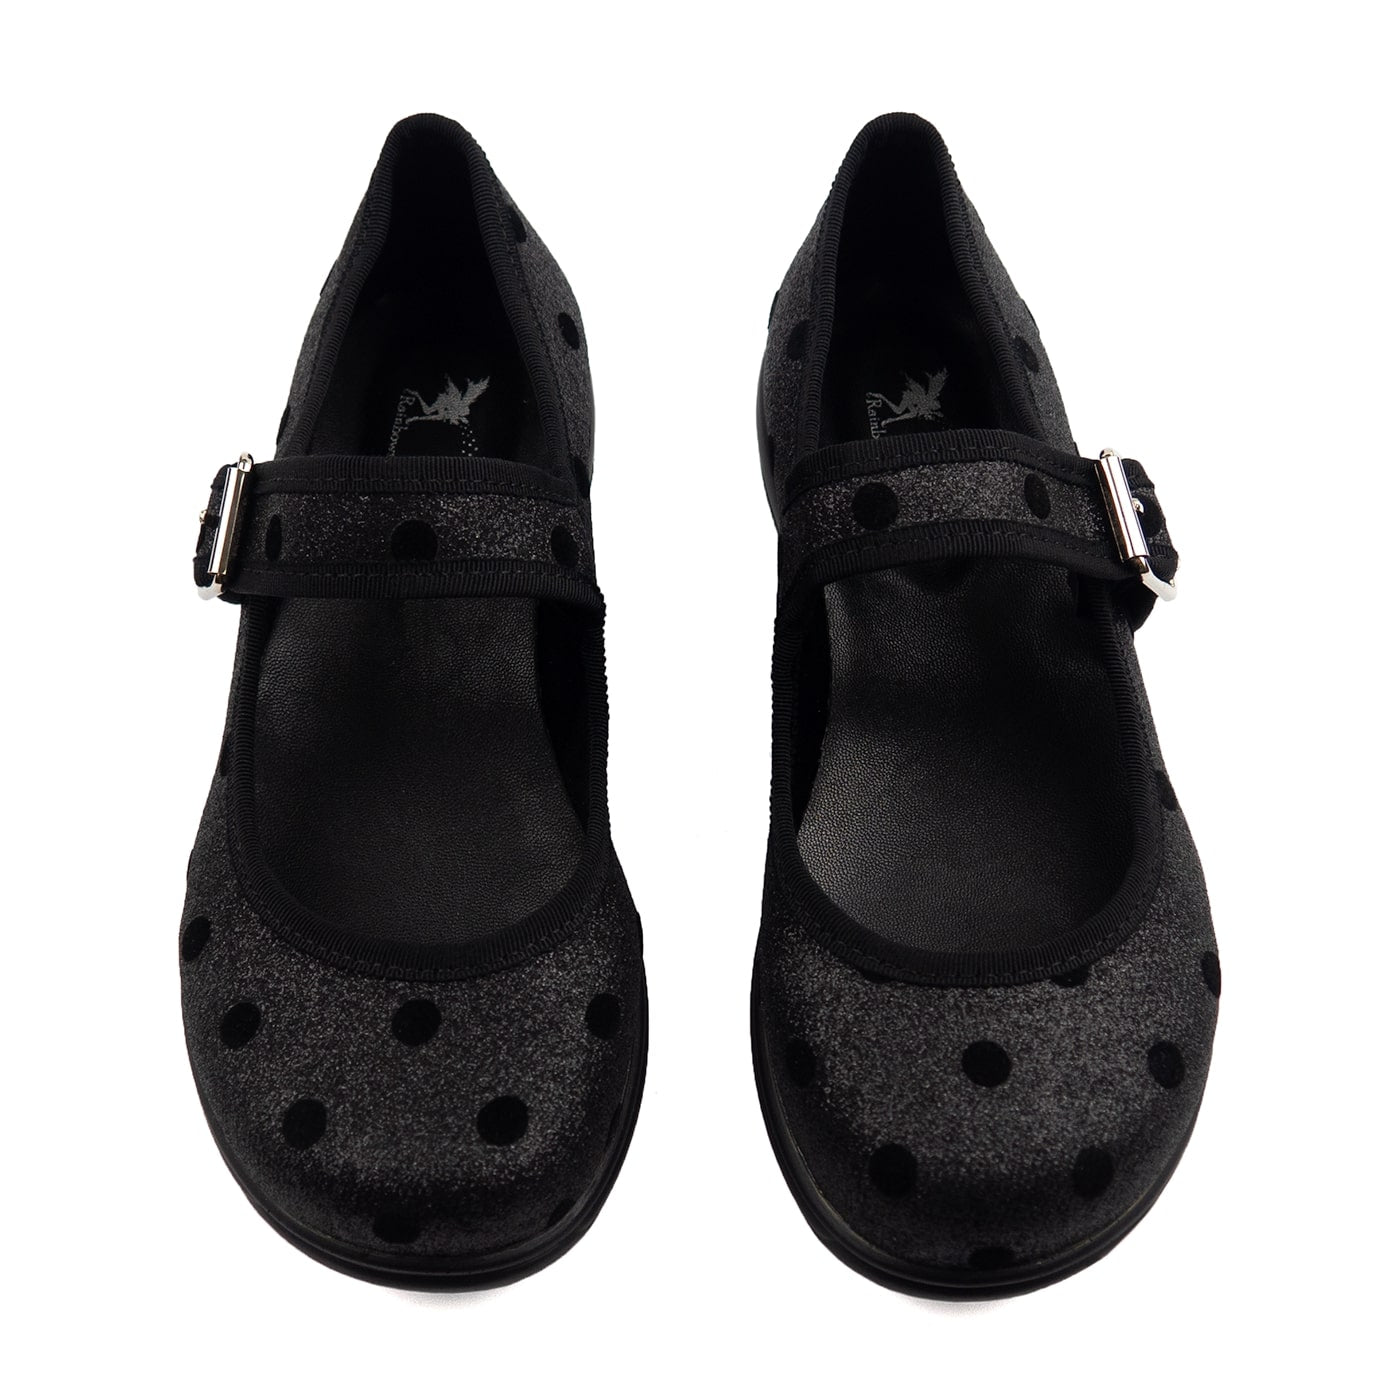 Dolly Mary Janes by RainbowsAndFairies.com.au (Black Glitter - Polka Dot - Sparkle Shoes - Buckle Shoes - Mismatched Shoes - Cute & Comfy) - SKU: FW_MARYJ_DOLLY_ORG - Pic-02